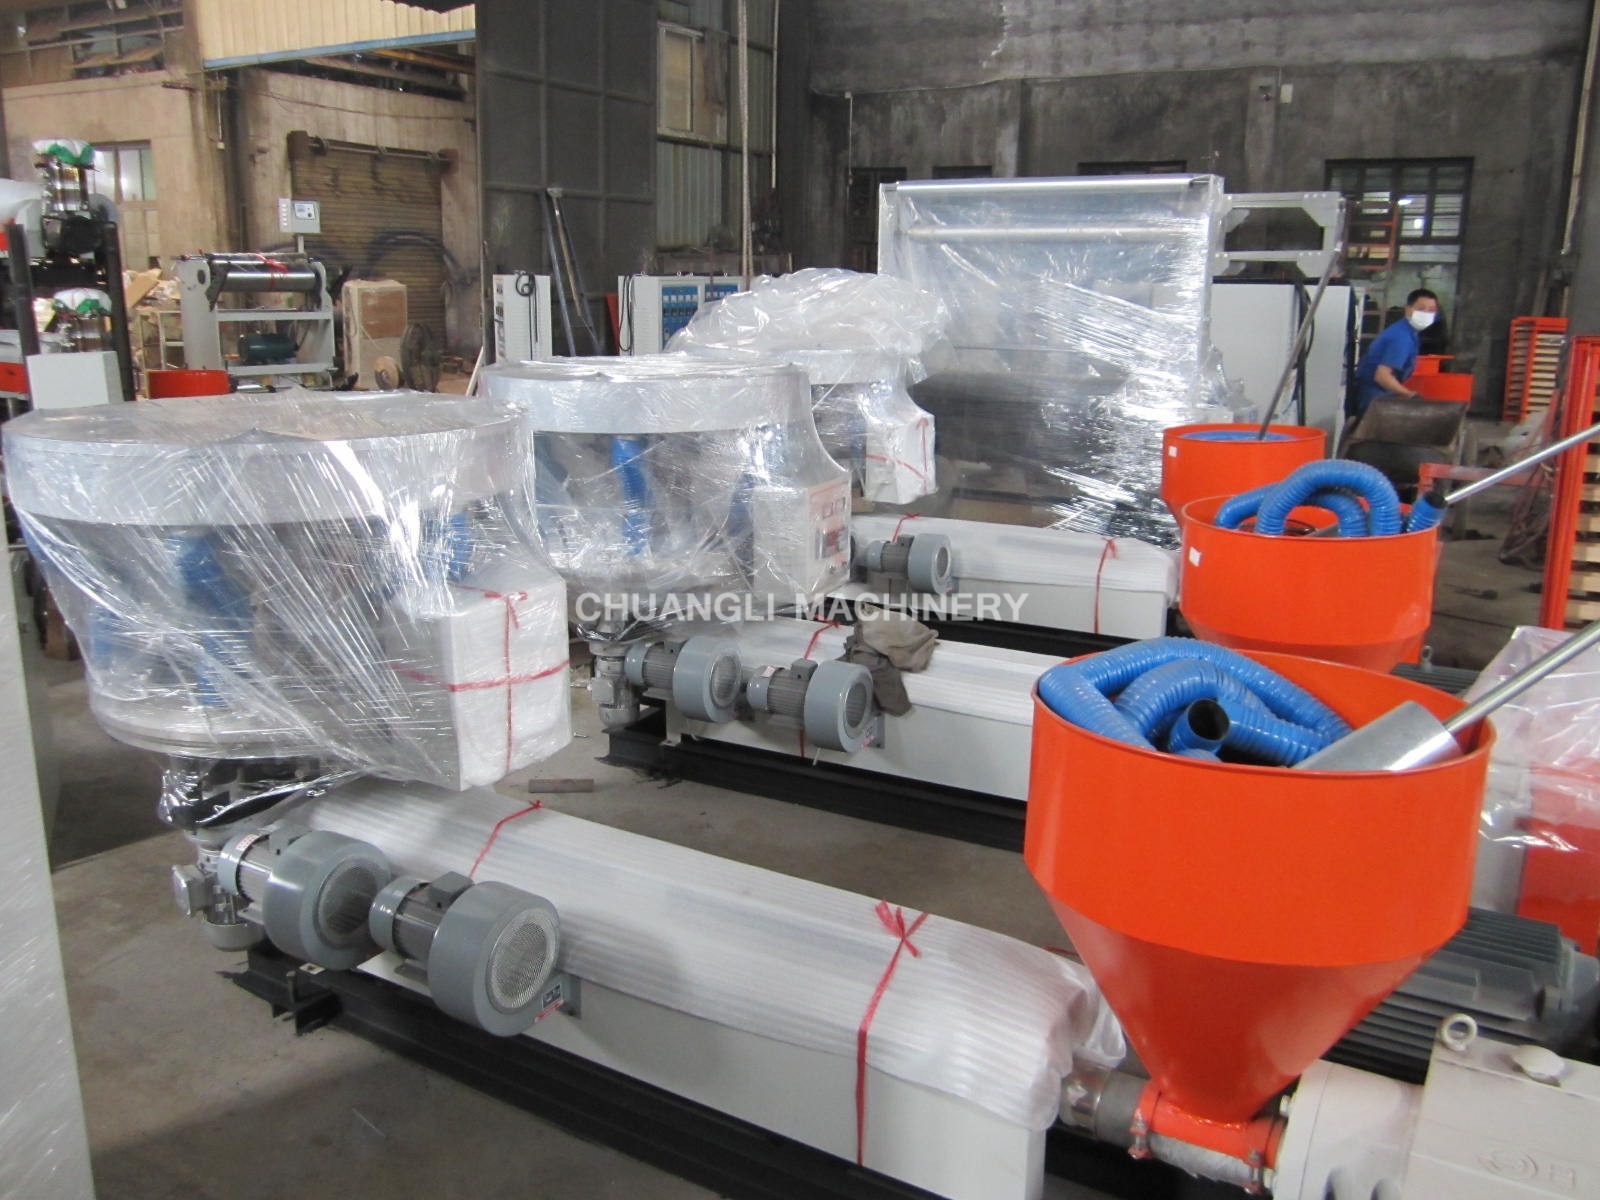 SJ-55/SJ-65/SJ-75 HDPE/LDPE Film Blowing Machine with Rotary-die Head and Double Winder